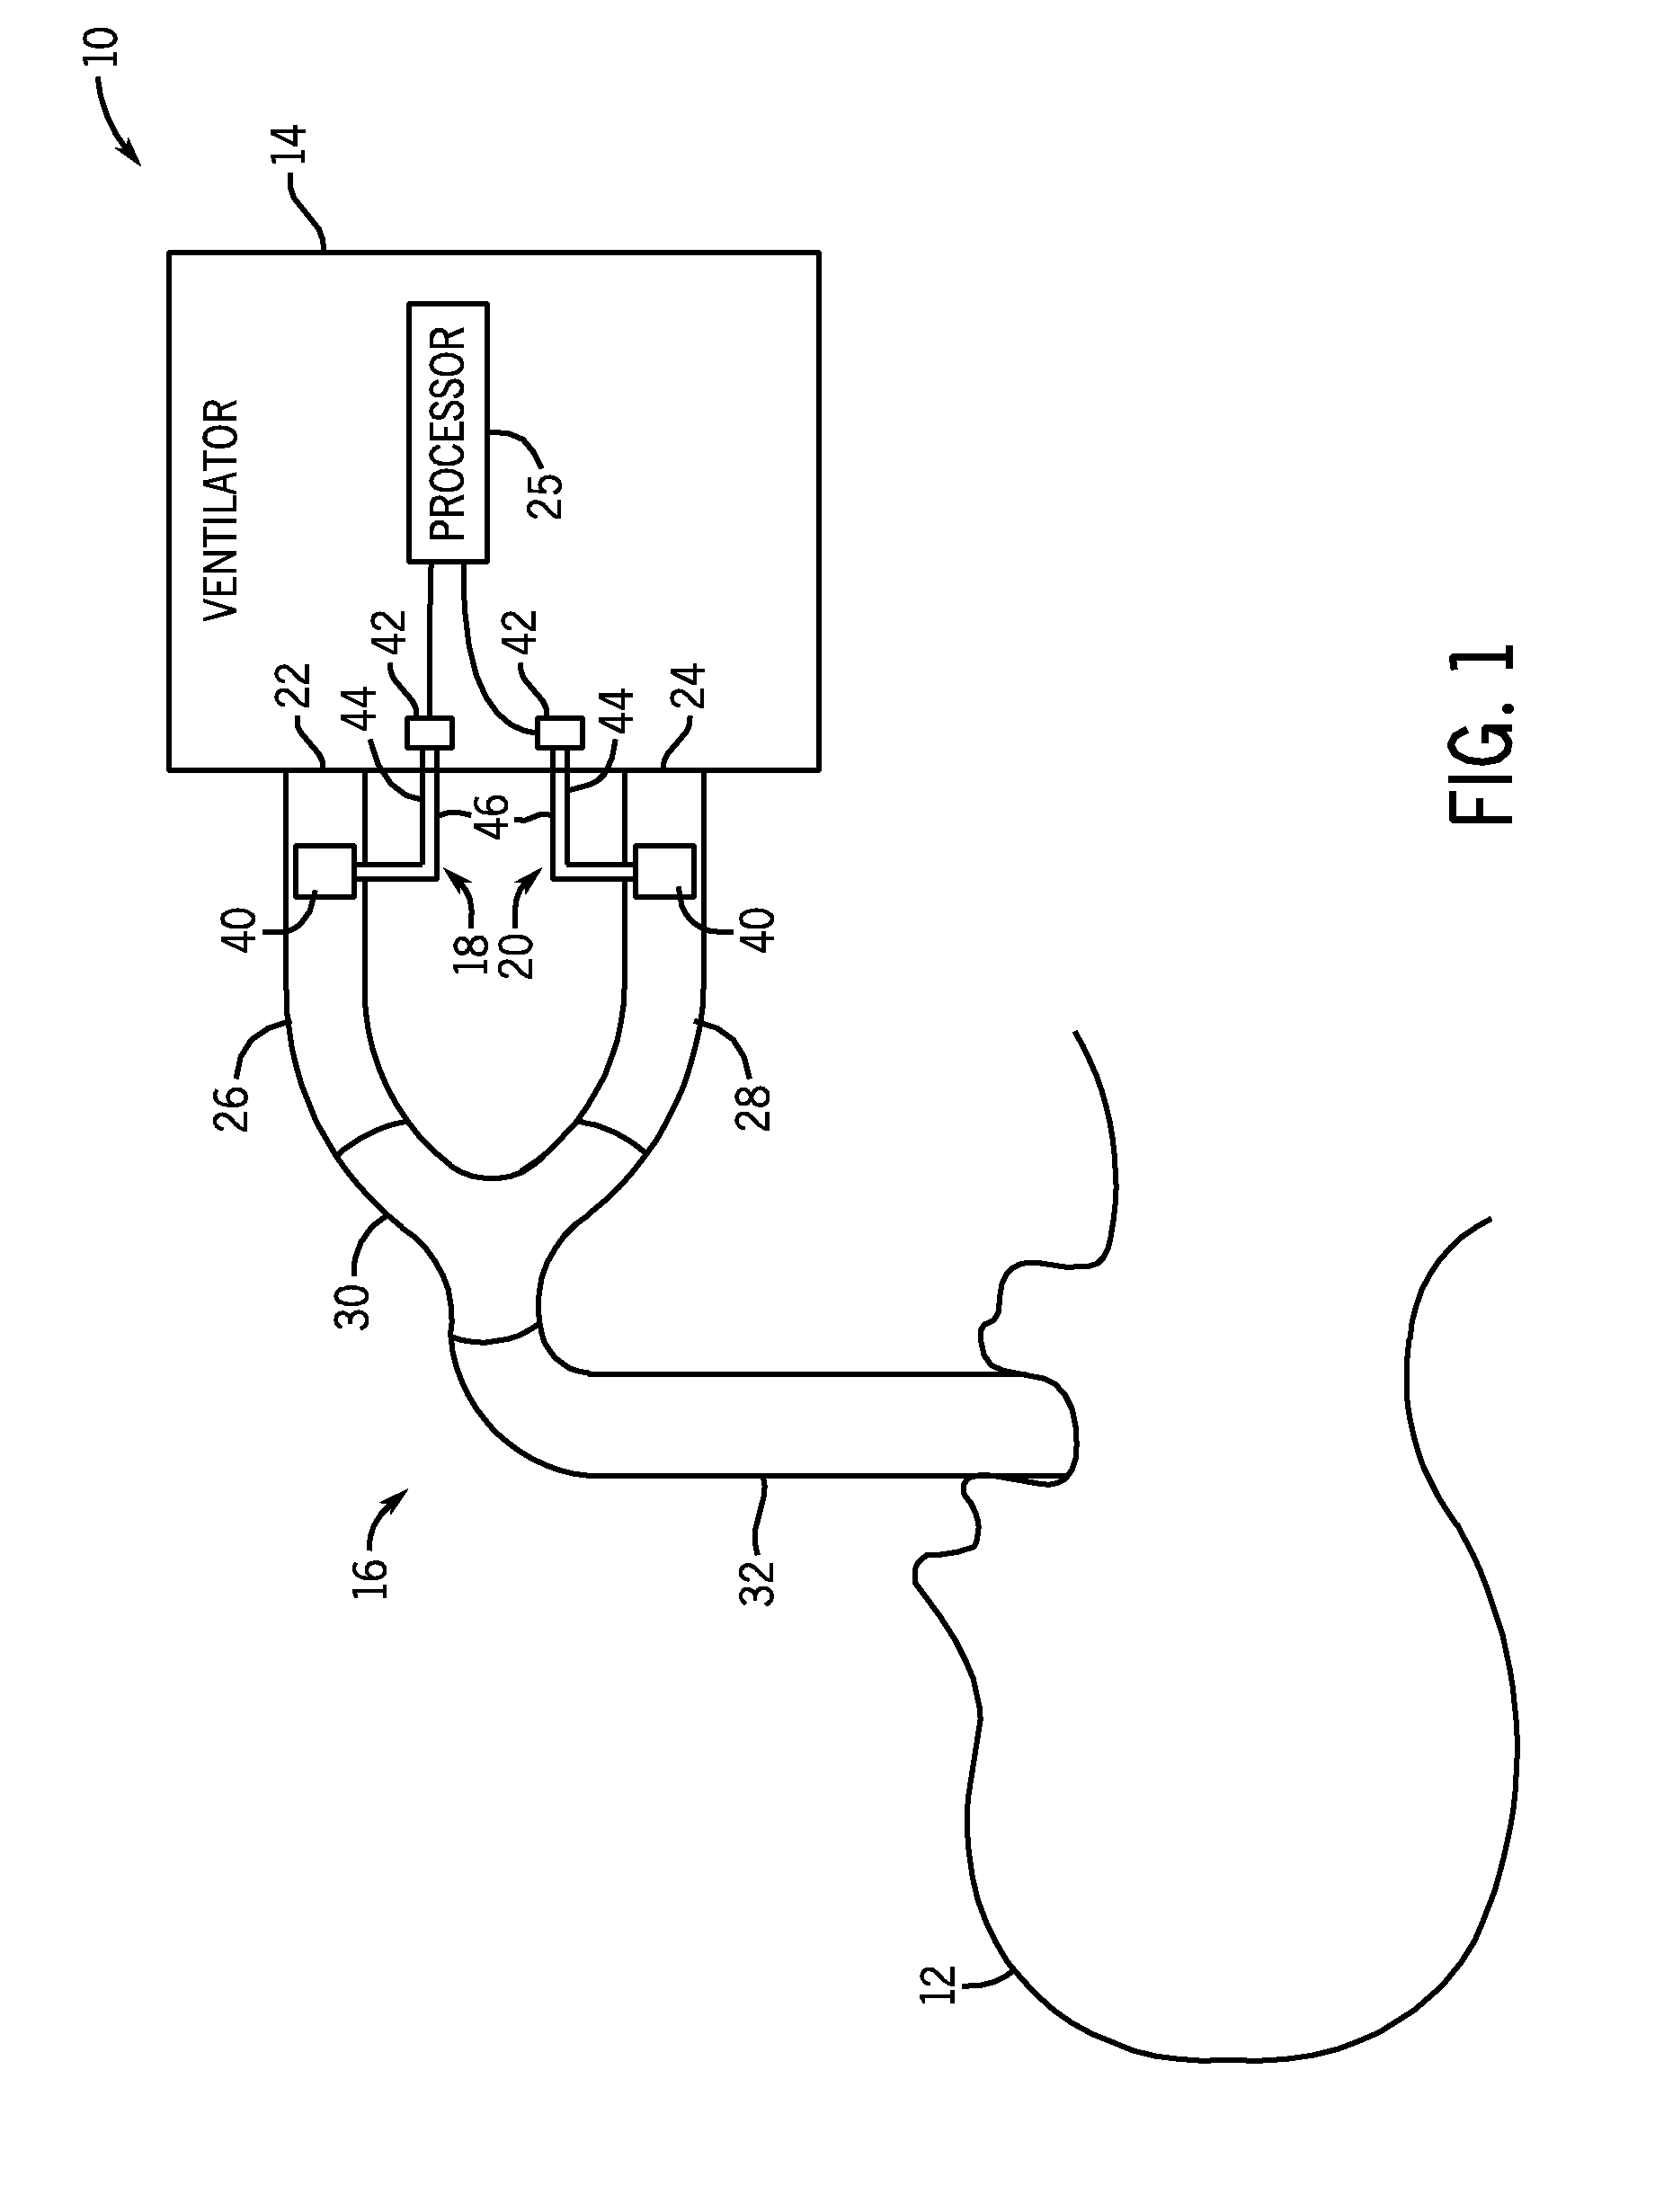 System and method for a flow sensor